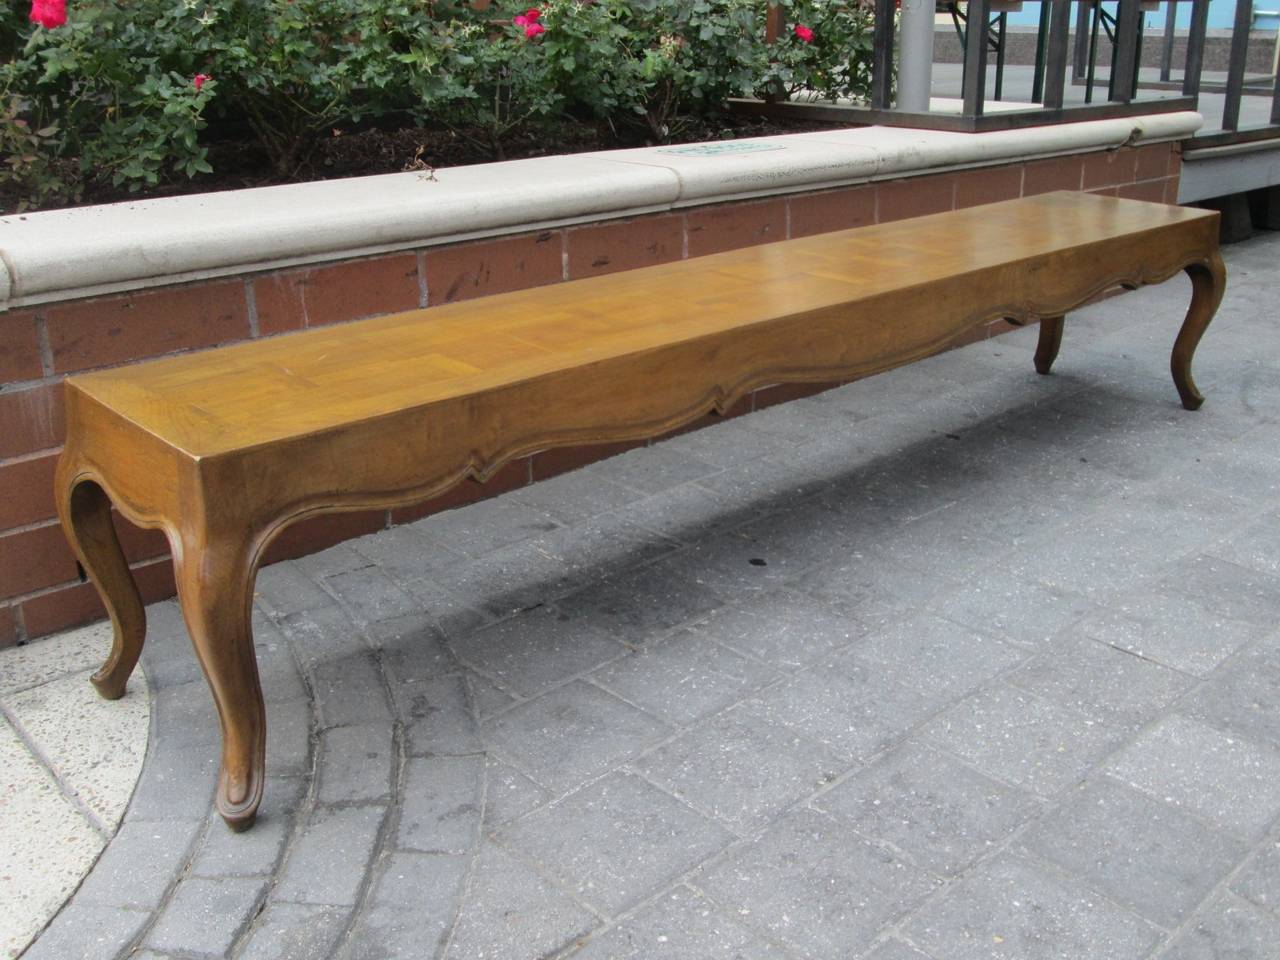 Long, French parquetry top bench. Bench is walnut. Has cabriole legs.  